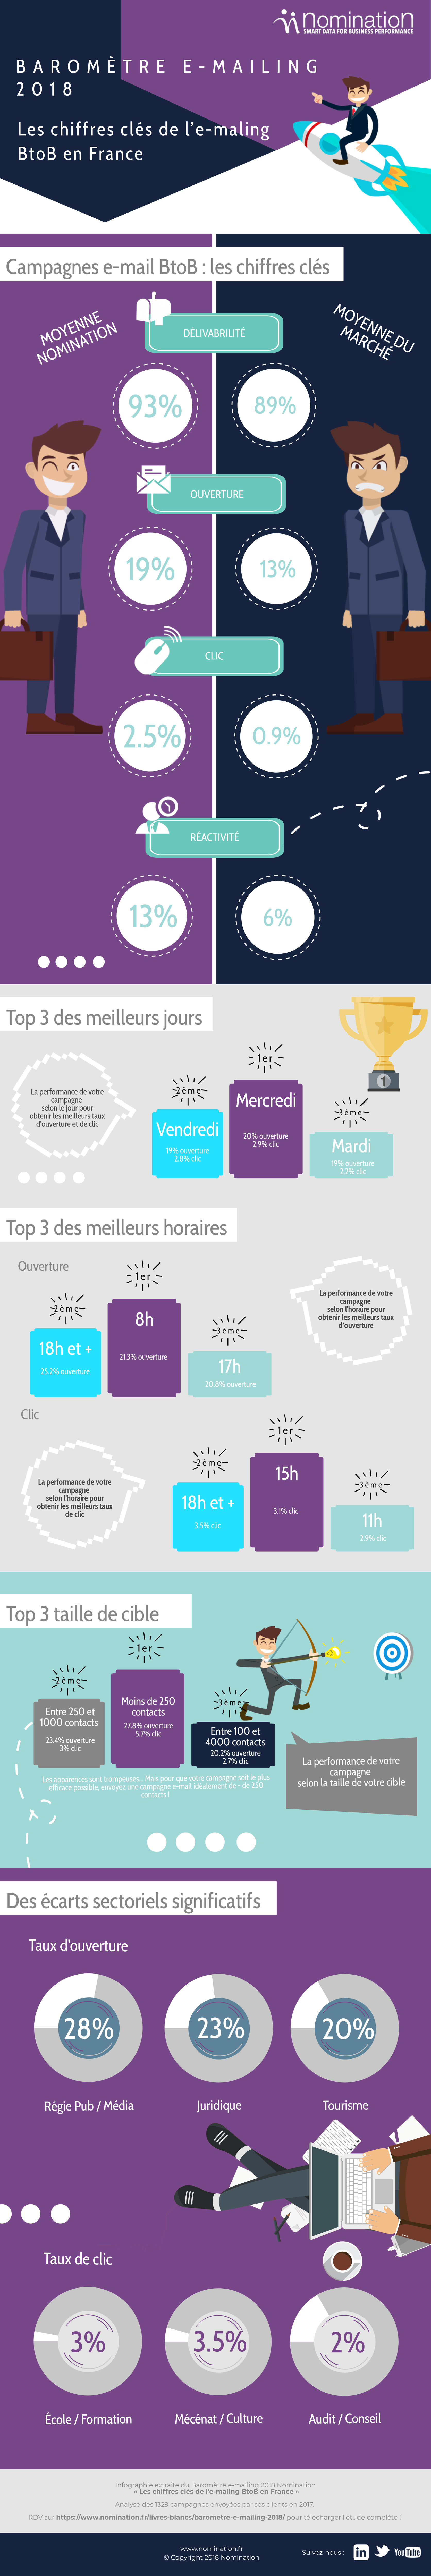 Infographie emailing